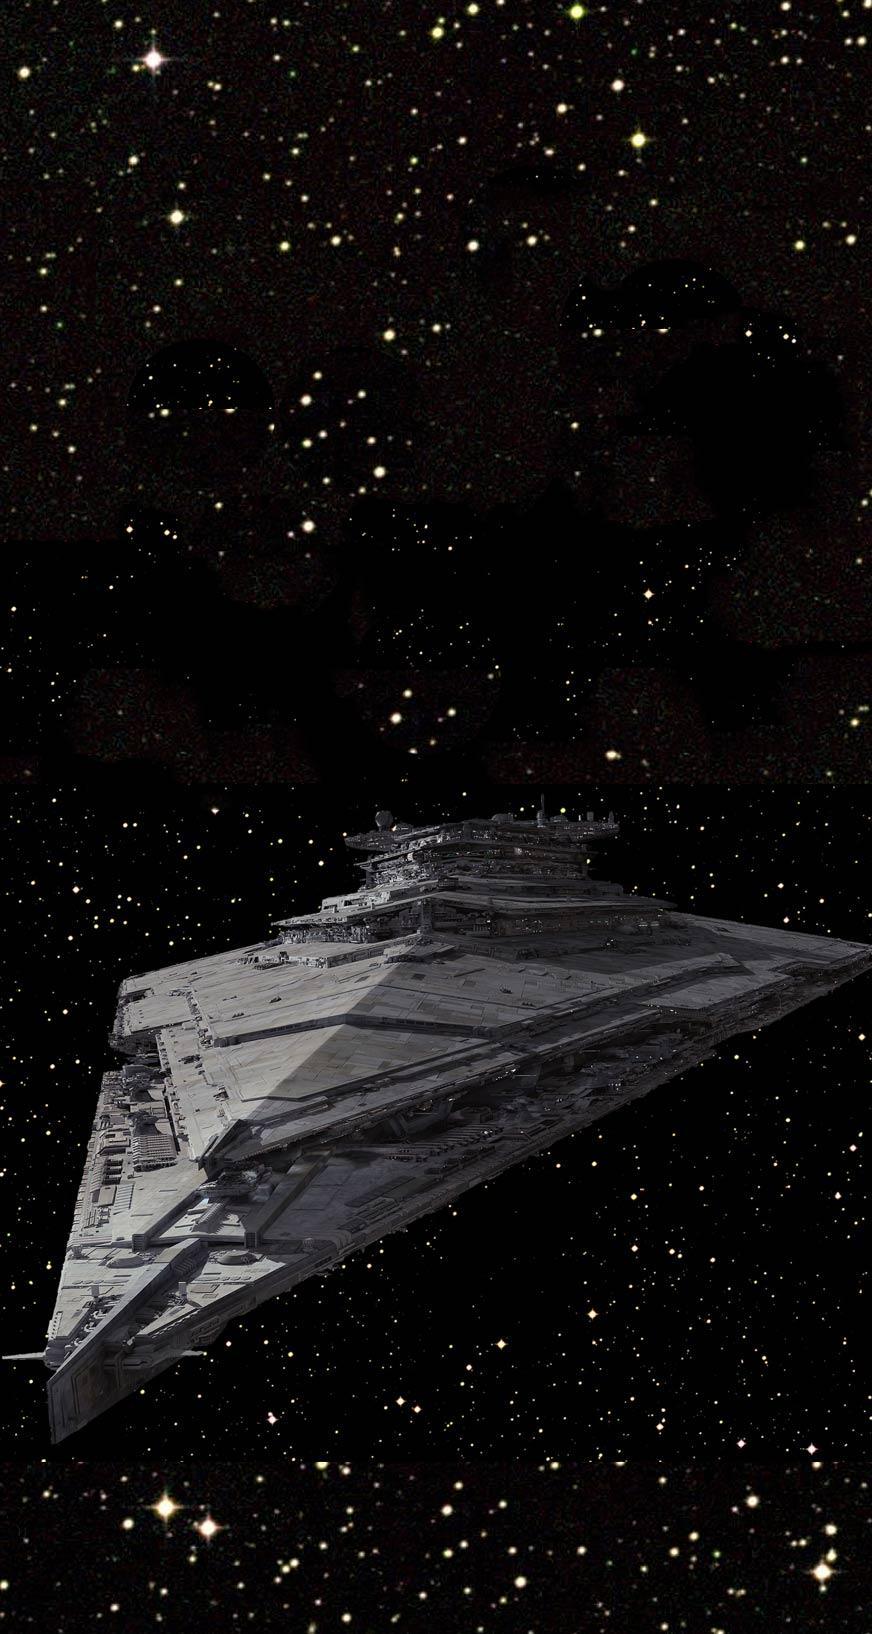 Star Destroyer Wallpapers - Top Free Star Destroyer Backgrounds ...